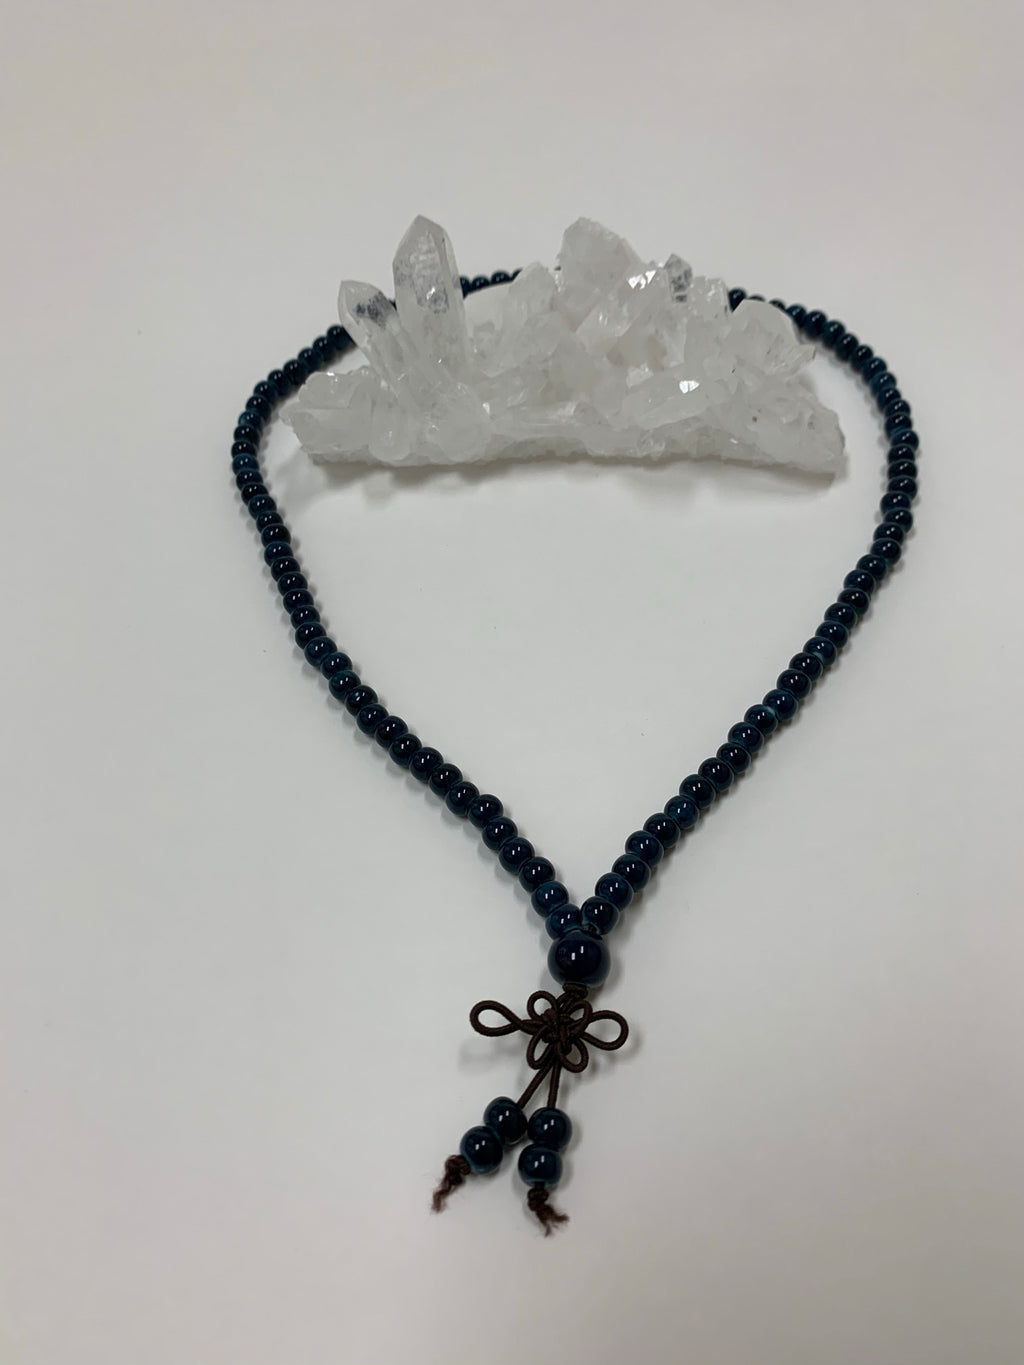 Prayer beads/mala necklace consists of 108 small, blue ceramic beads. Used to count 108 repetitions of a mantra, so the user can pay attention to the sounds, vibrations and meaning of the mantra being chanted. 